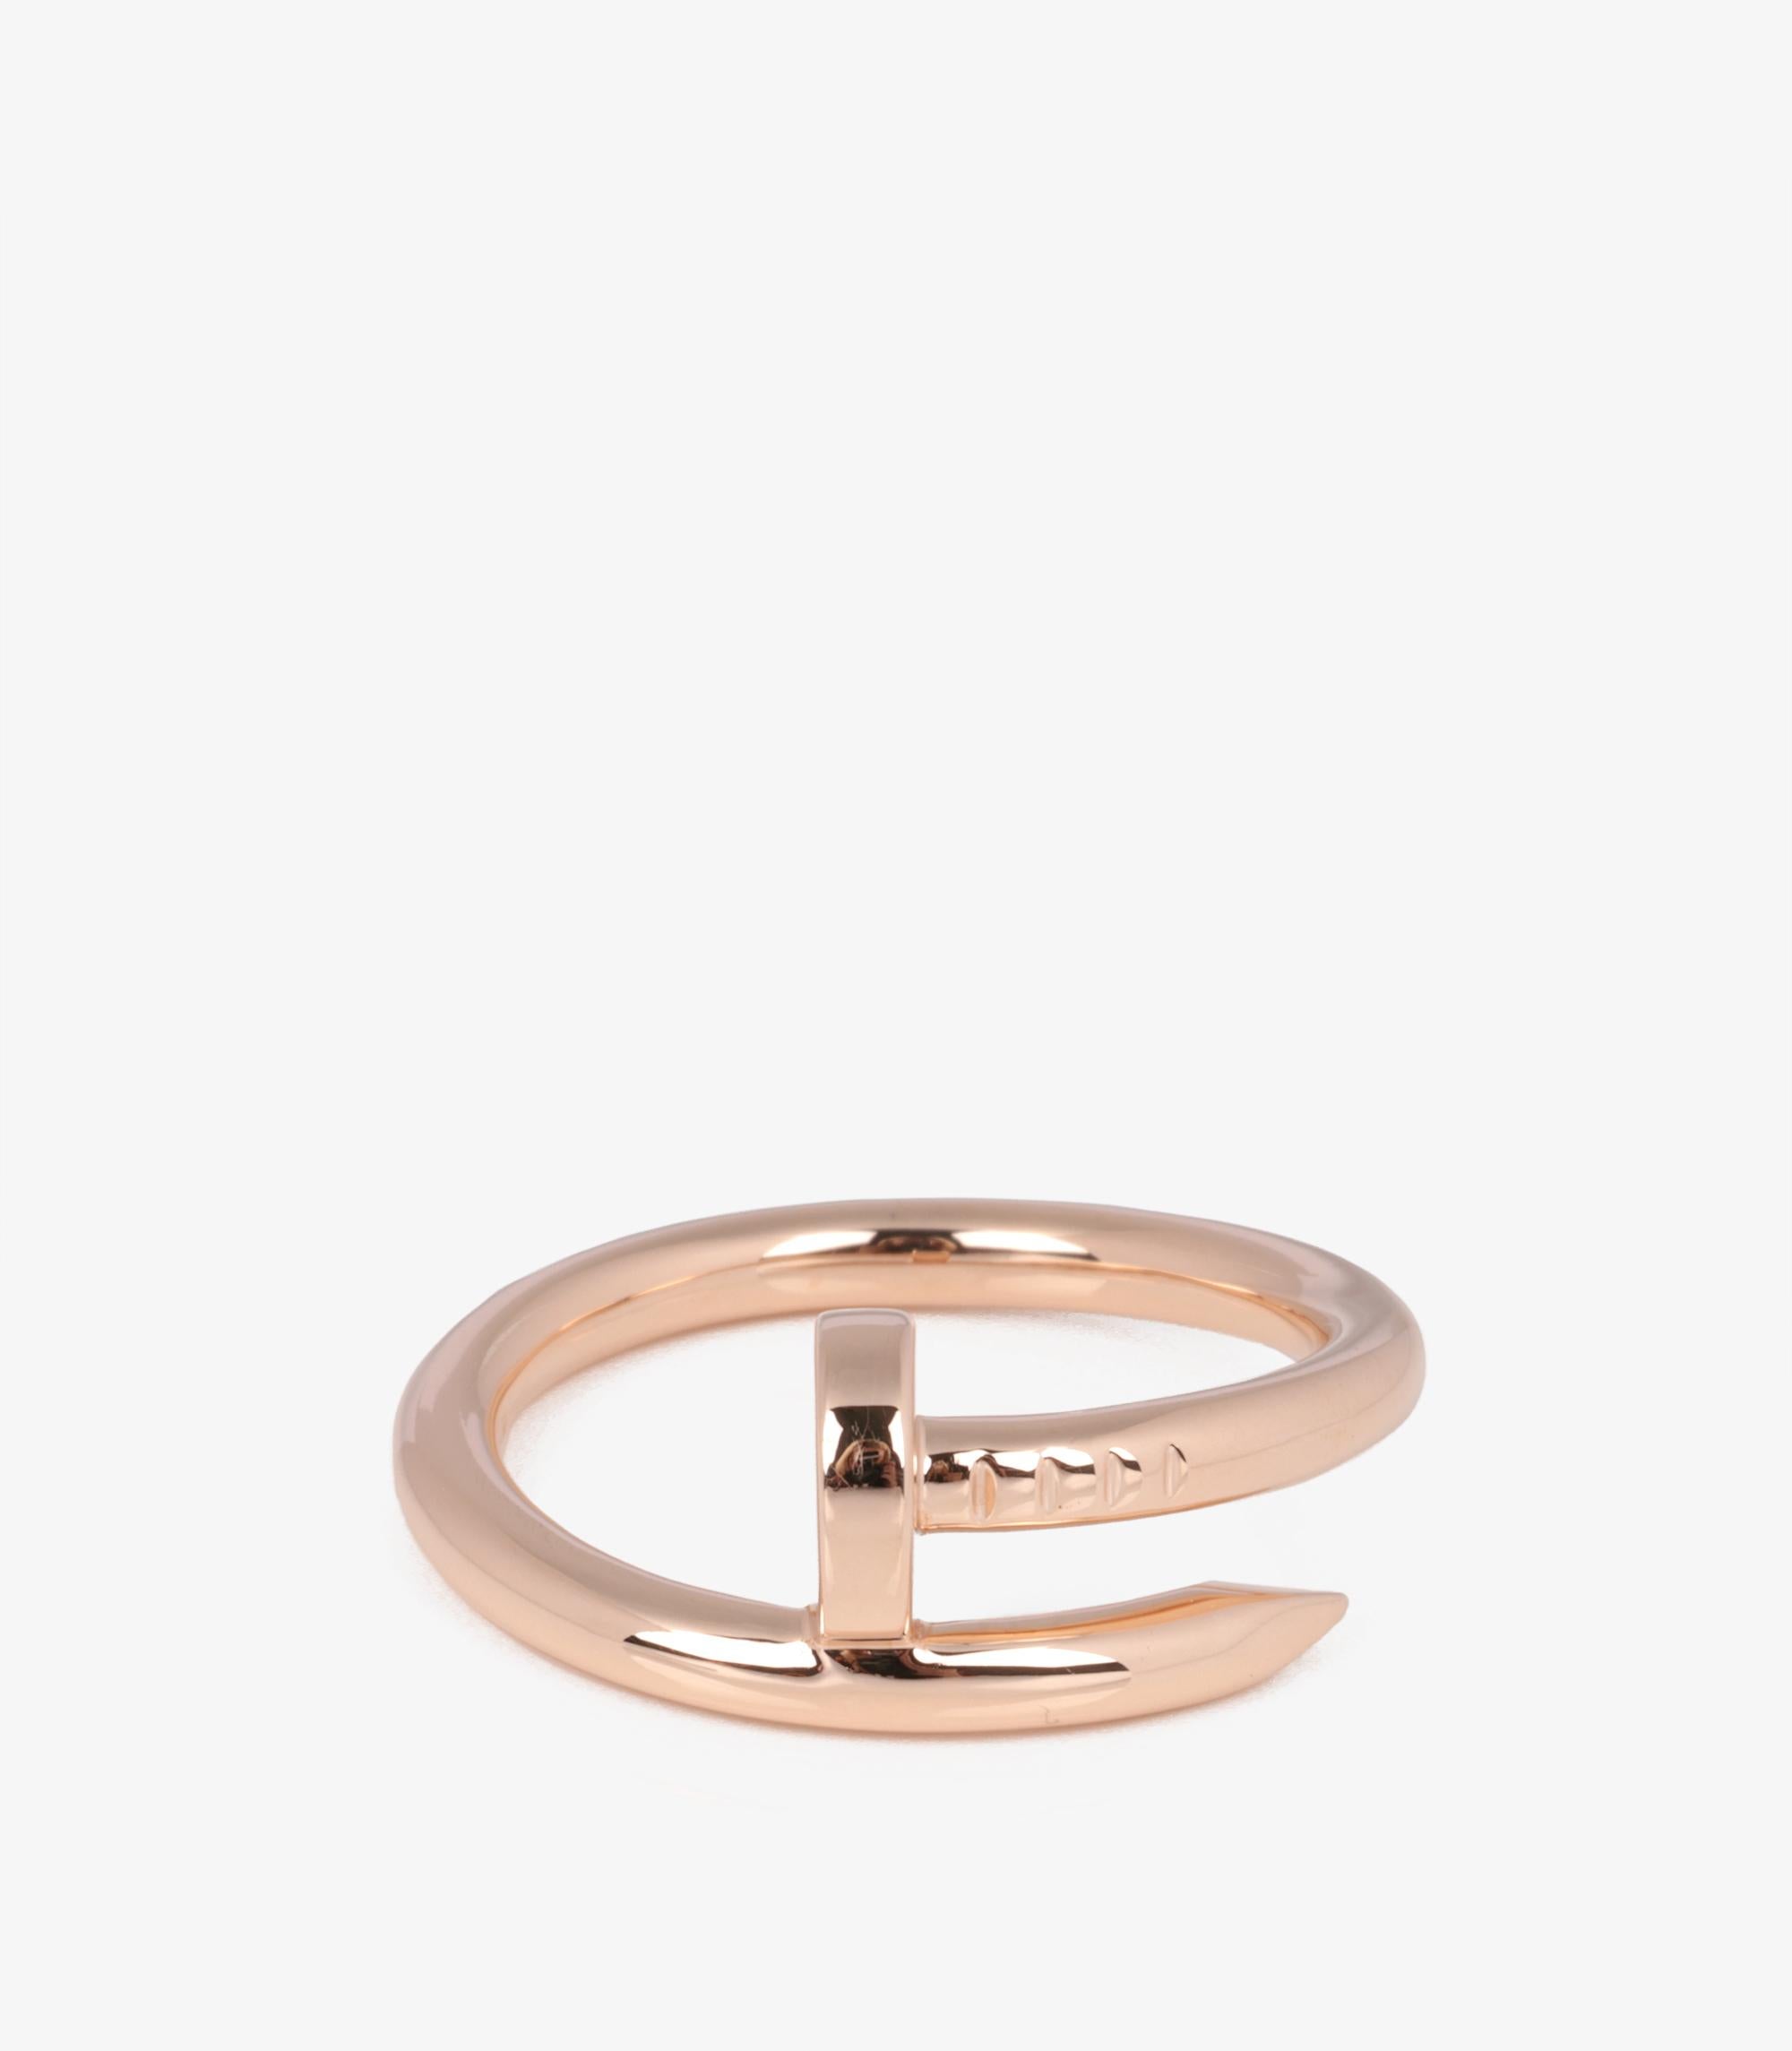 Cartier 18ct Rose Gold Juste Un Clou Ring

Brand- Cartier
Model- Juste un Clou Ring
Product Type- Ring
Serial Number- JP****
Age- Circa 2020
Accompanied By- Cartier Box, Certificate, Receipt
Material(s)- 18ct Rose Gold
UK Ring Size- S 1/2
EU Ring